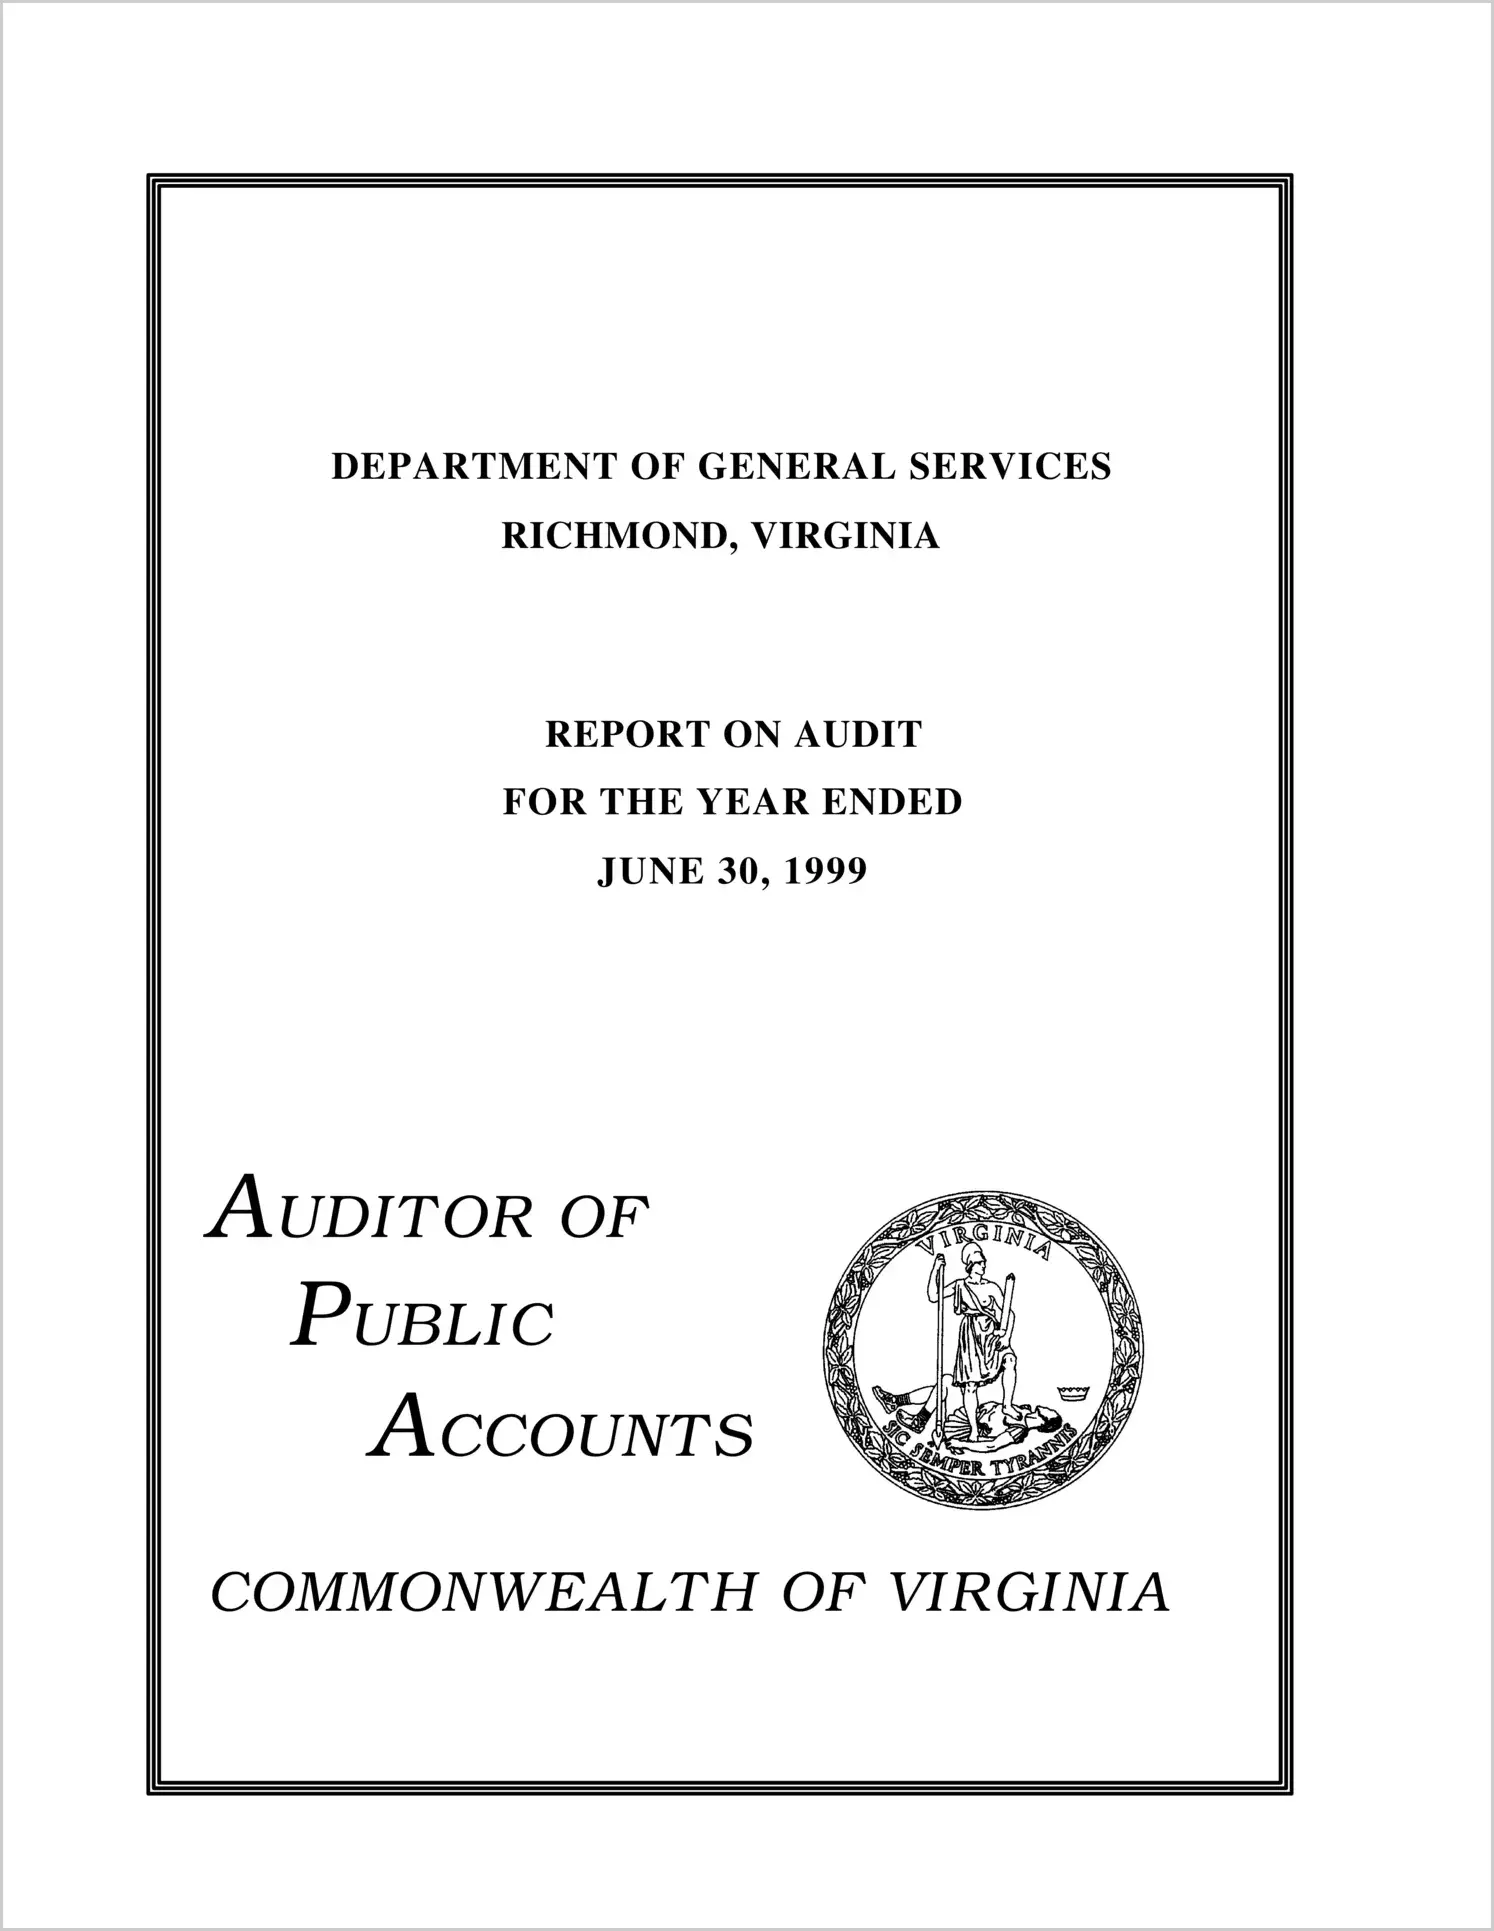 Department of General Services for the year ended June 30, 1999